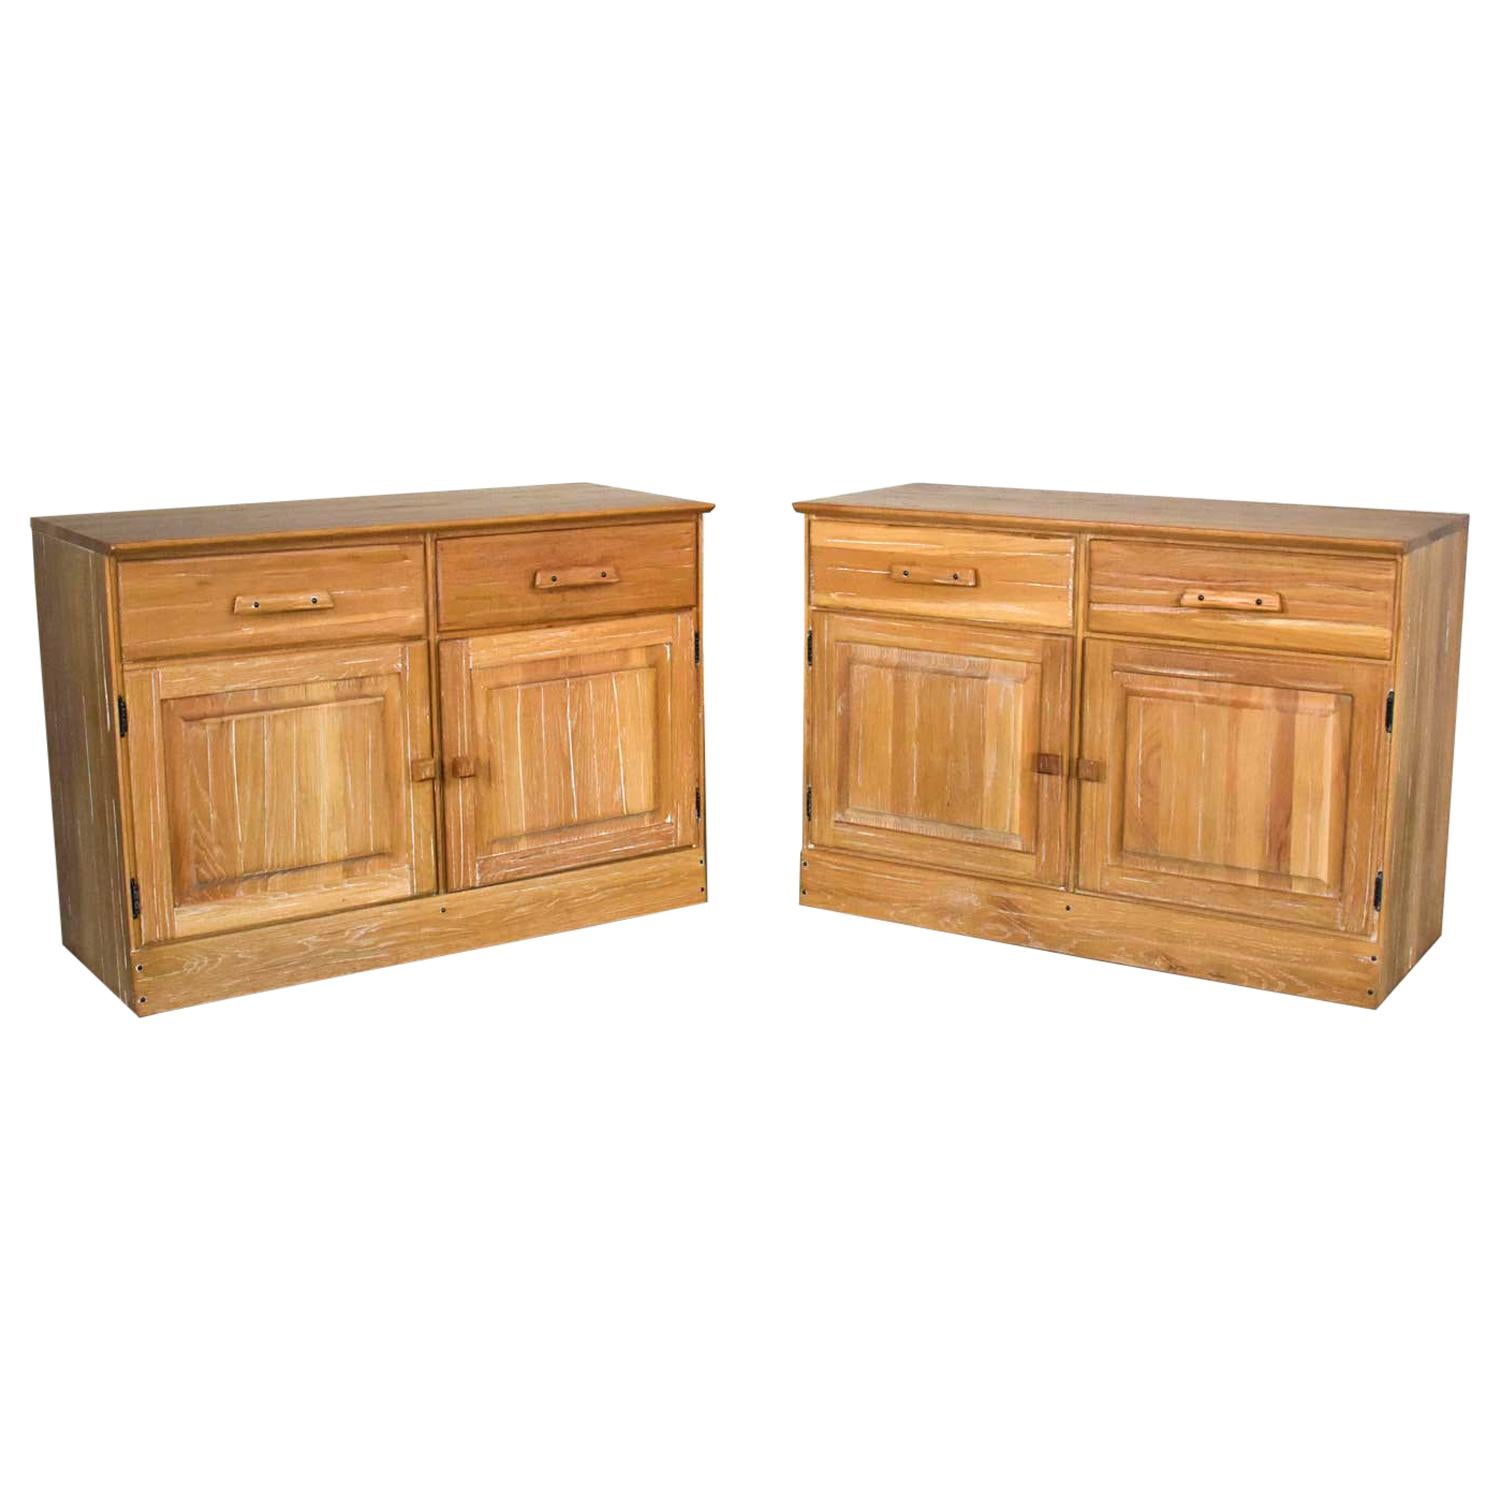 Vintage Ranch Oak Pair of Small Credenzas or Buffet Cabinets, A. Brandt Company